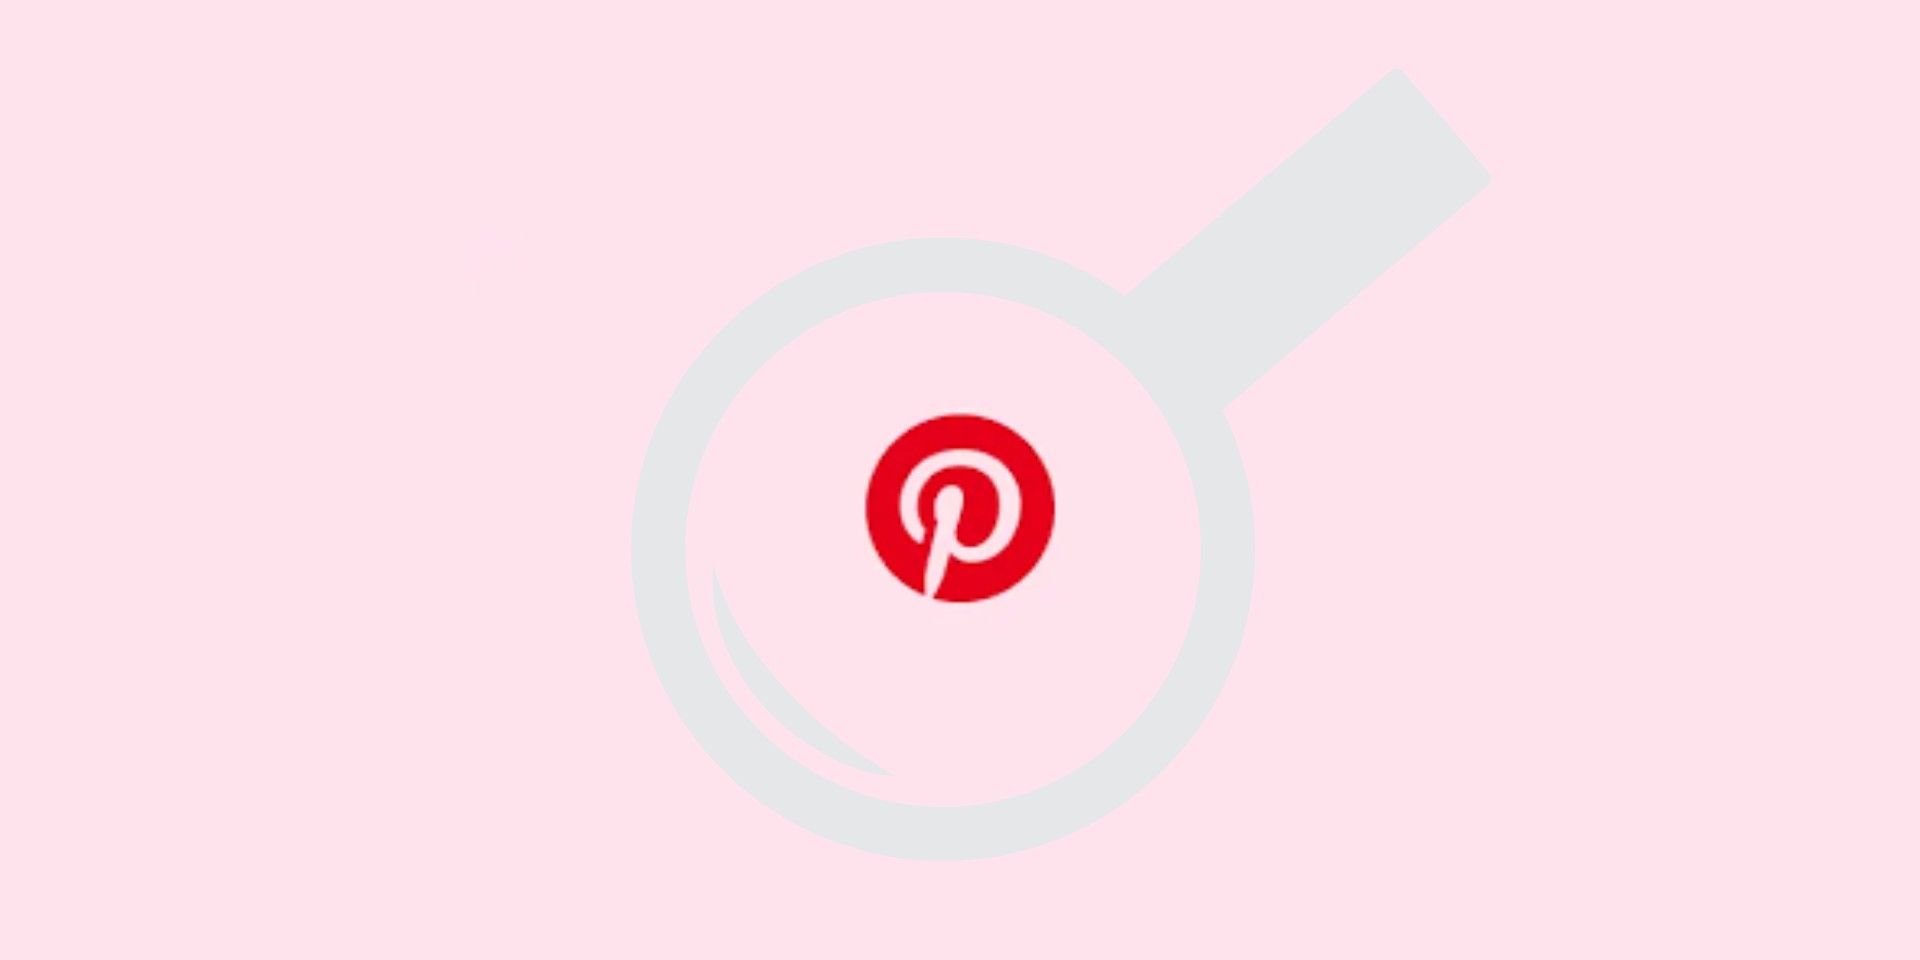 How To Search Pinterest Without Actually Logging In